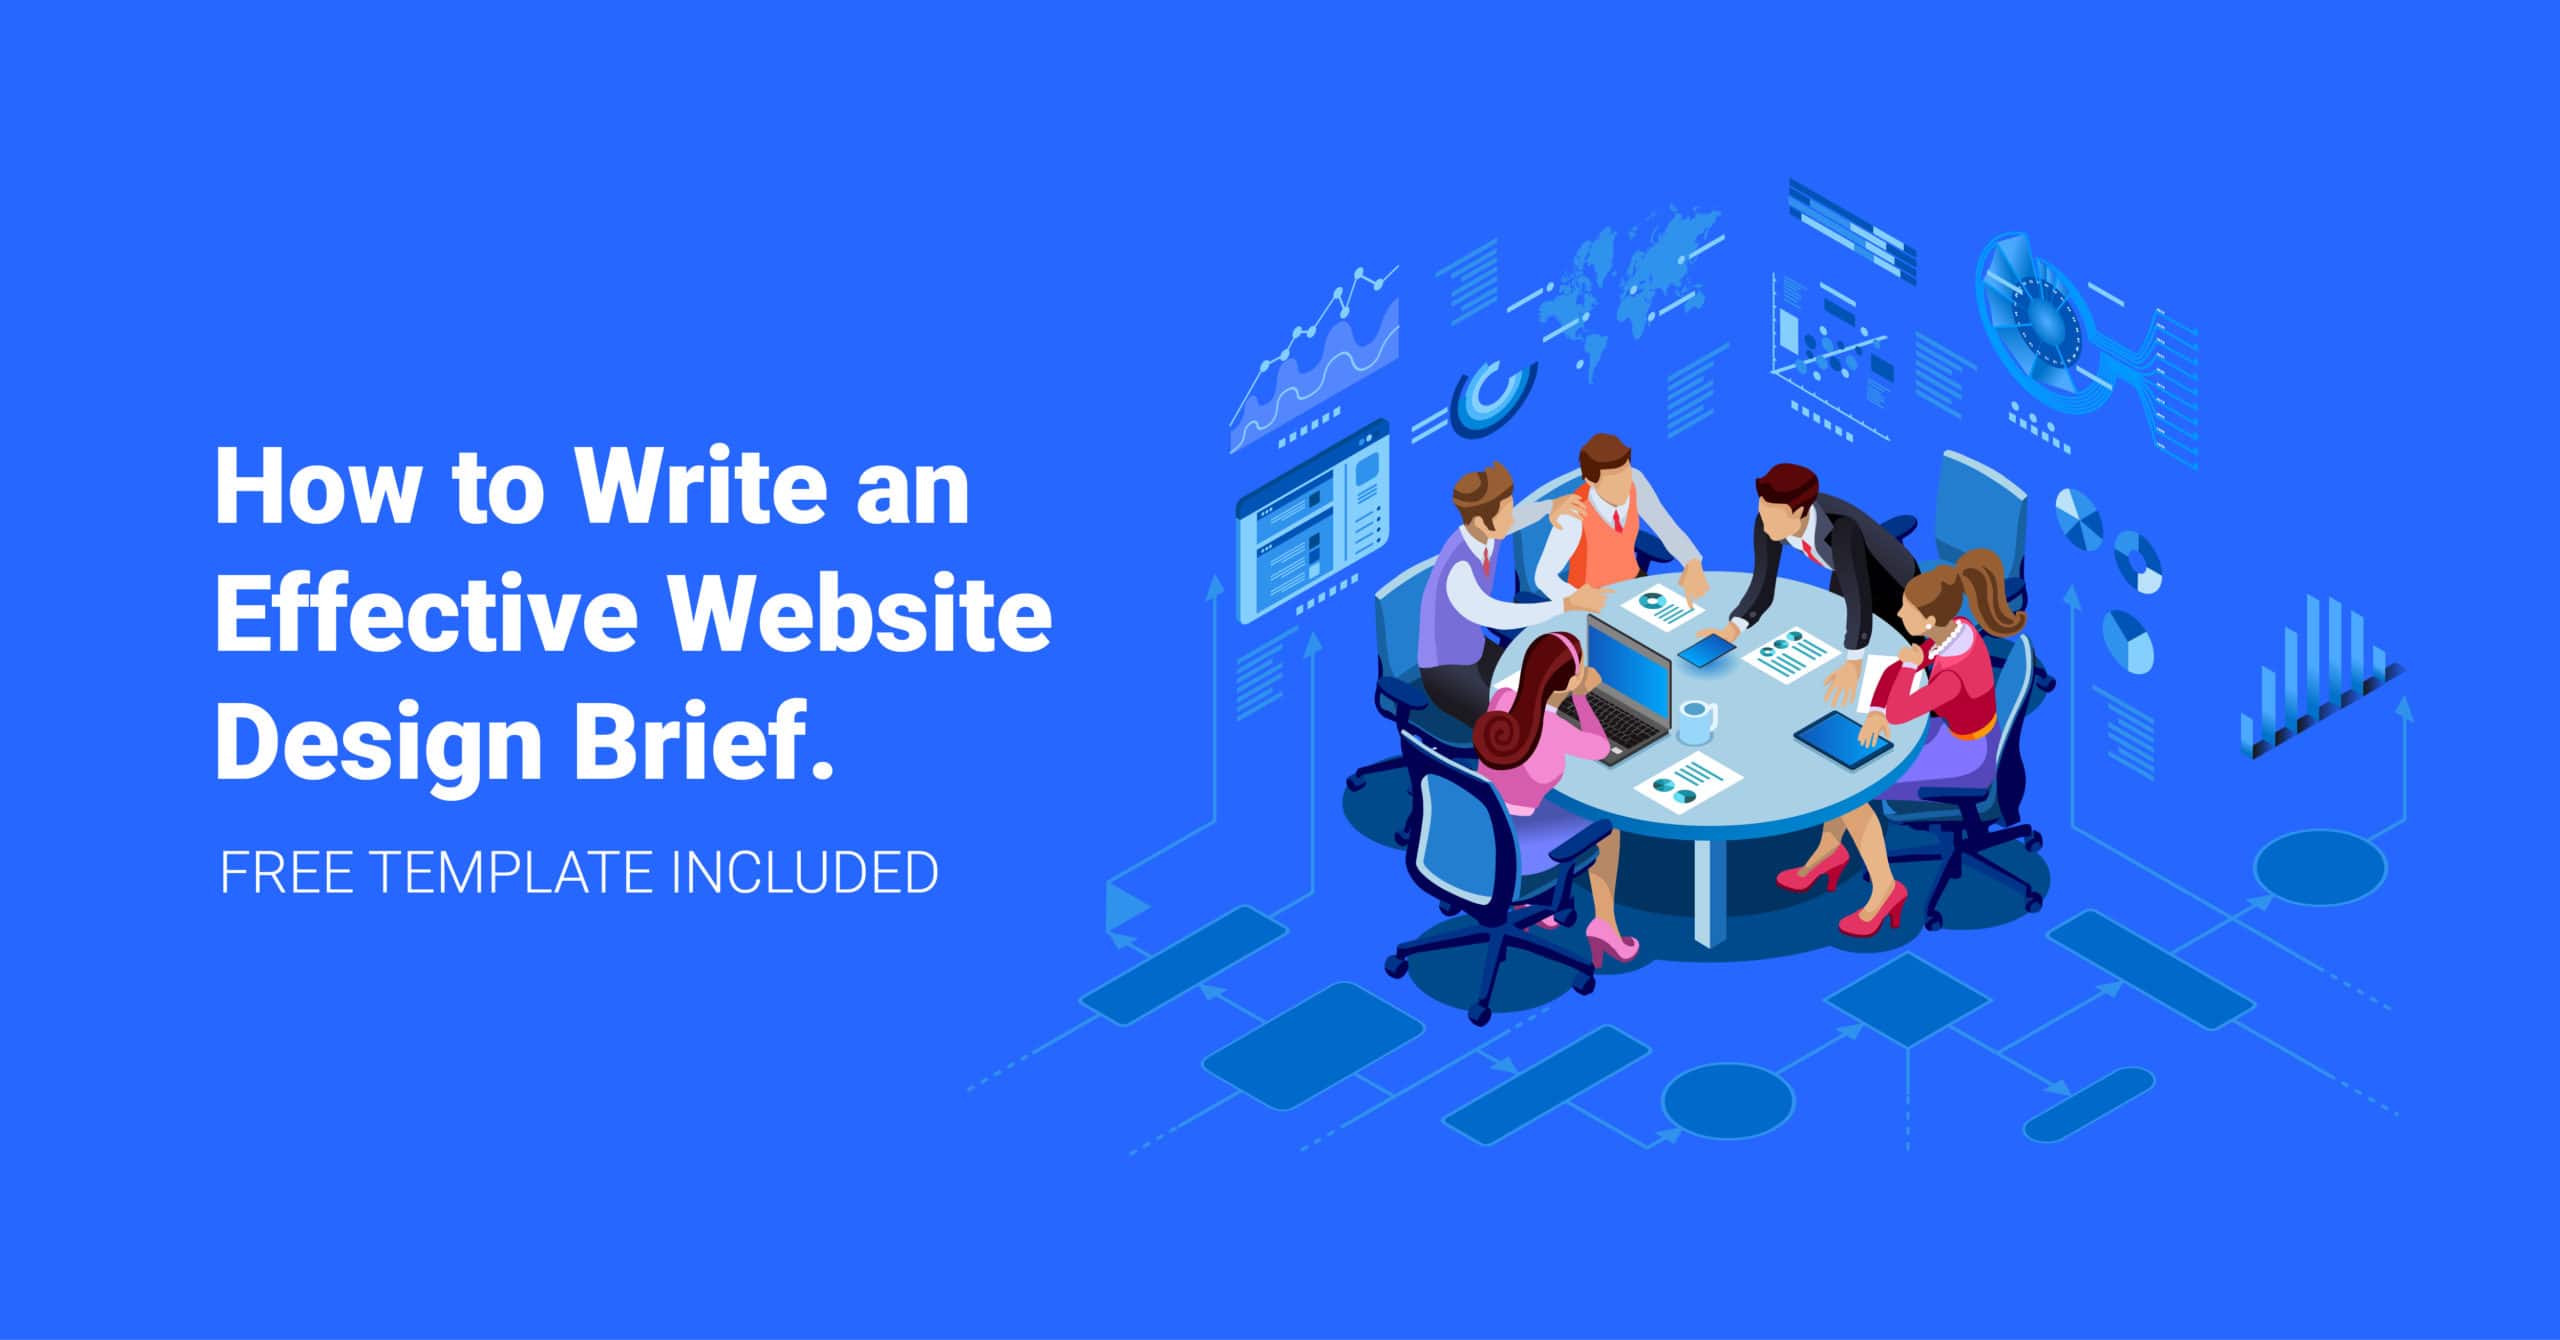 How to write and effective website design brief.